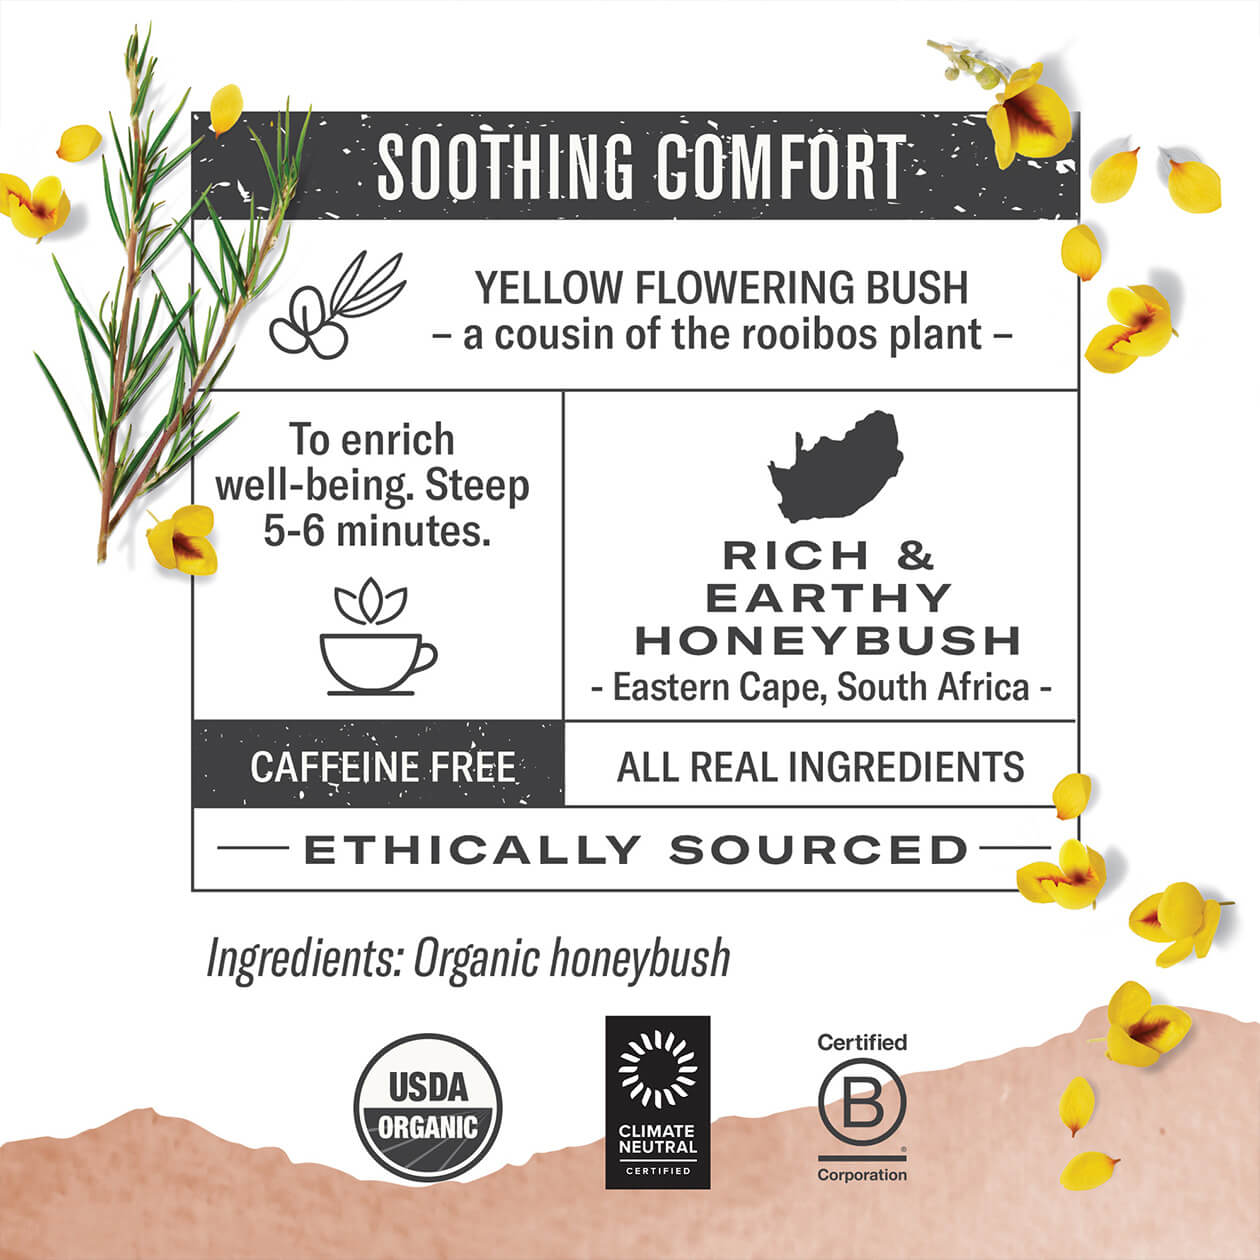 Infographic about Honeybush: steep 5-6 minutes, origin: Eastern Cape South Africa, caffeine free, all real ingredients, ethically sourced